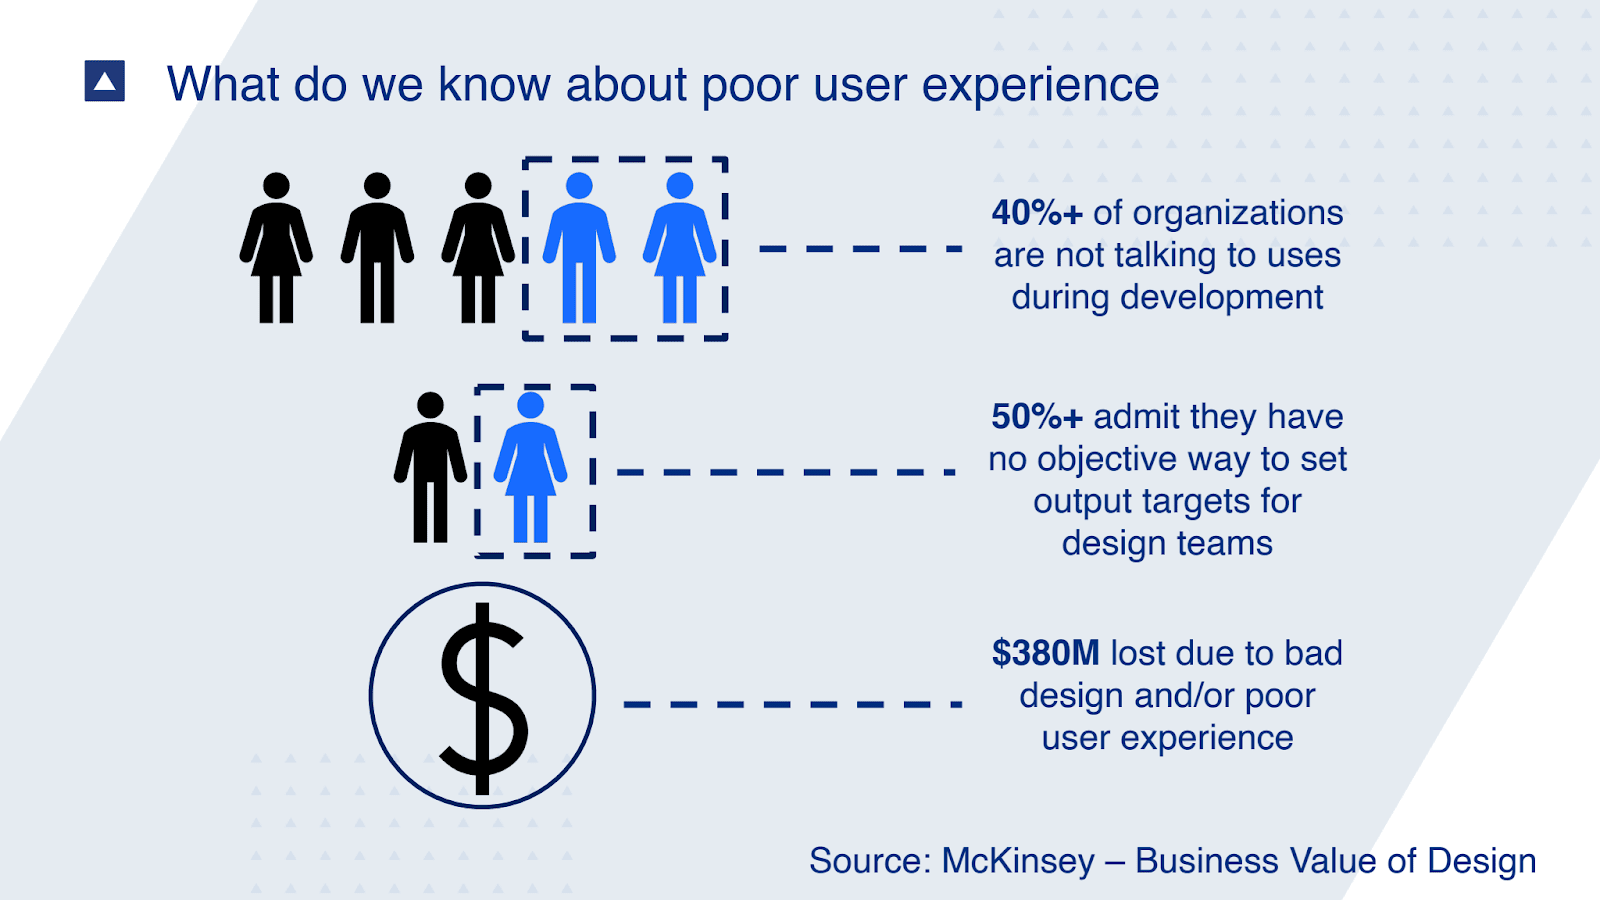 What we know about poor user experience